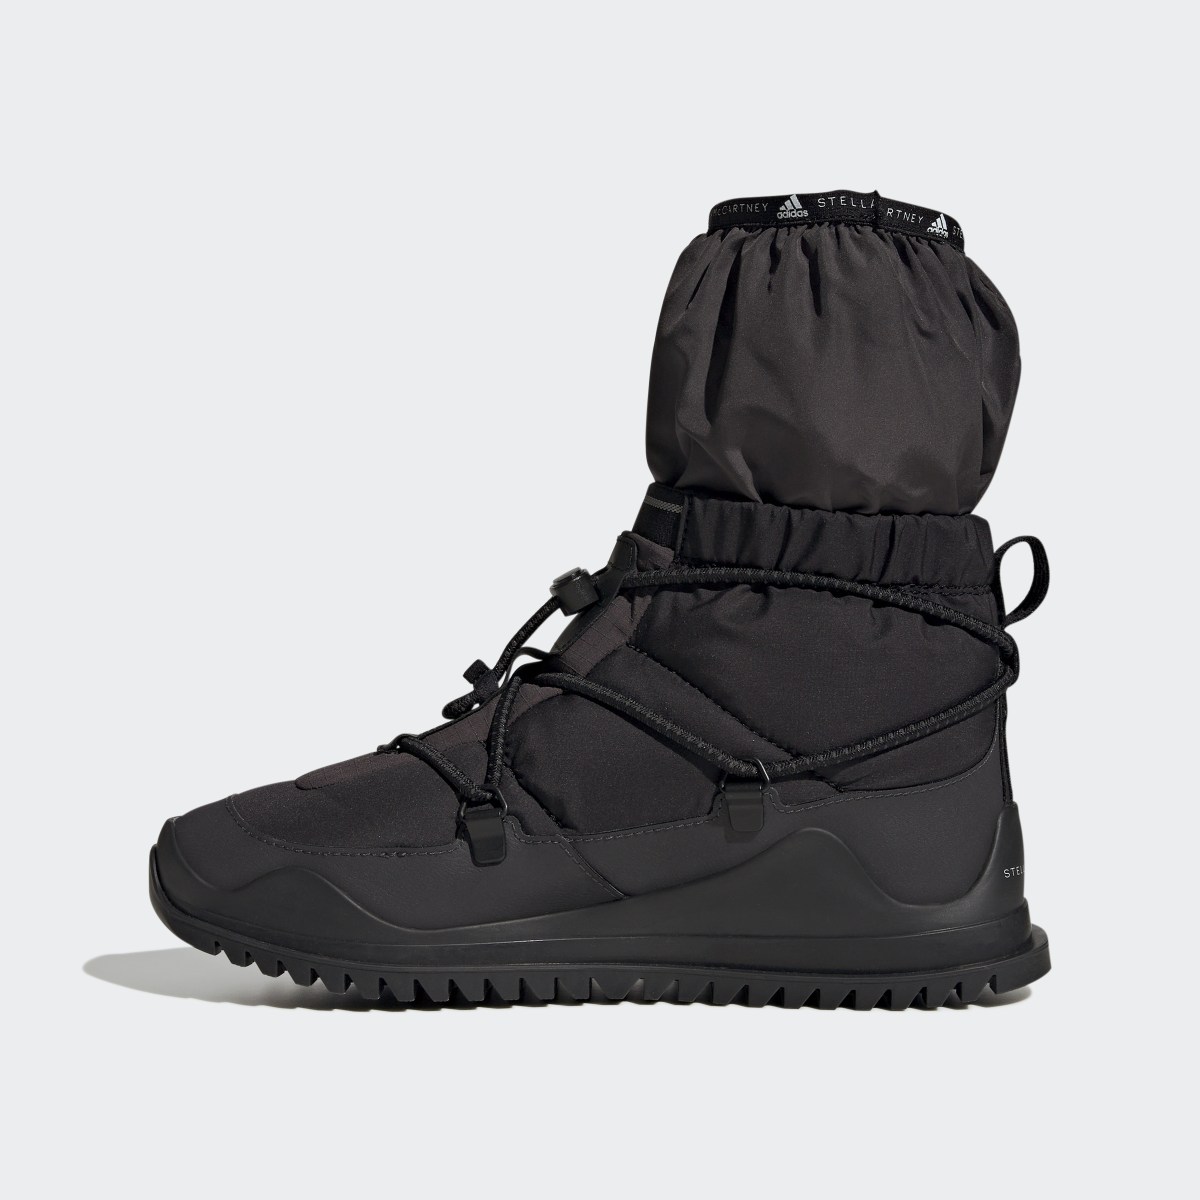 Adidas by Stella McCartney Winter COLD.RDY Boot. 7